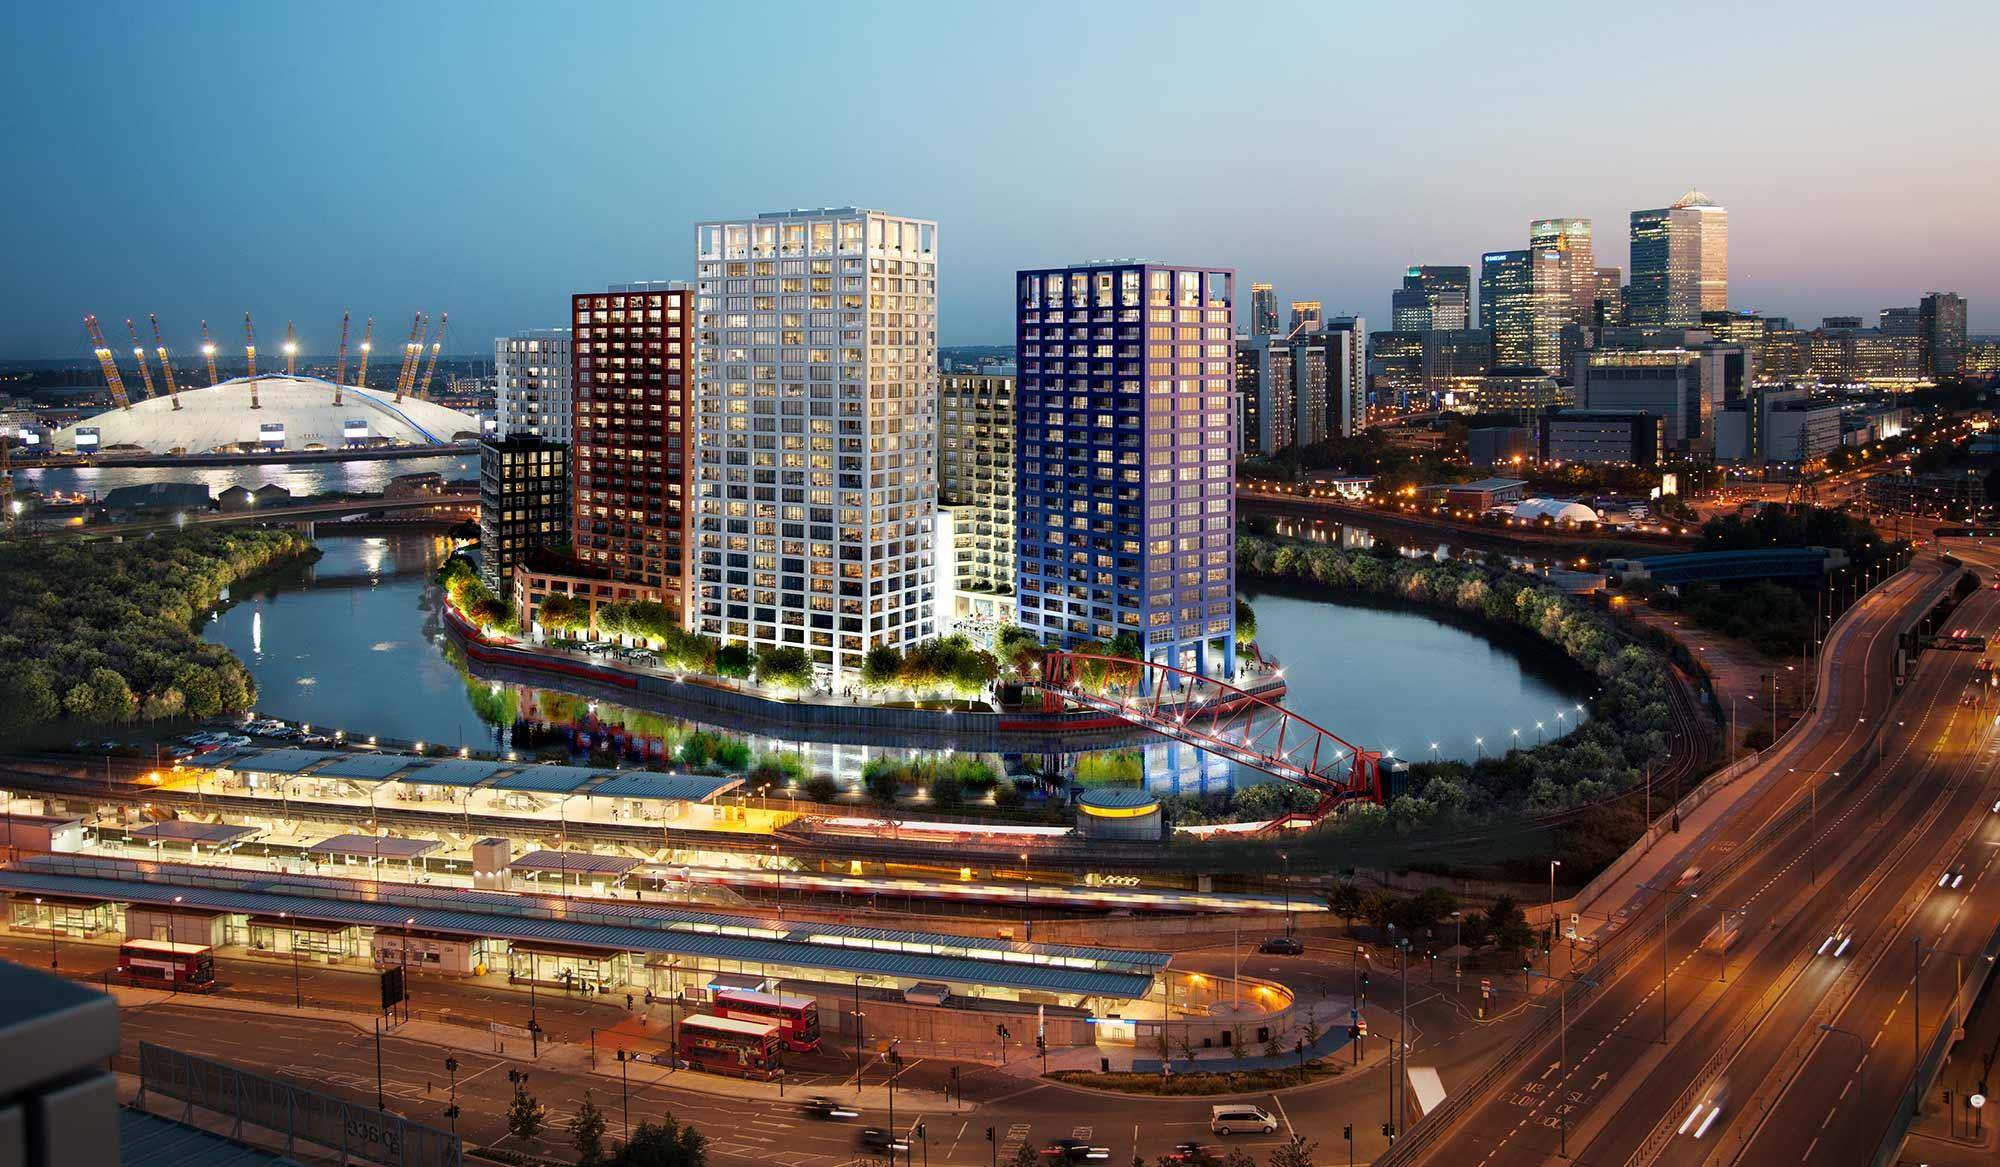 The 30-year transformation of London's Docklands district ...